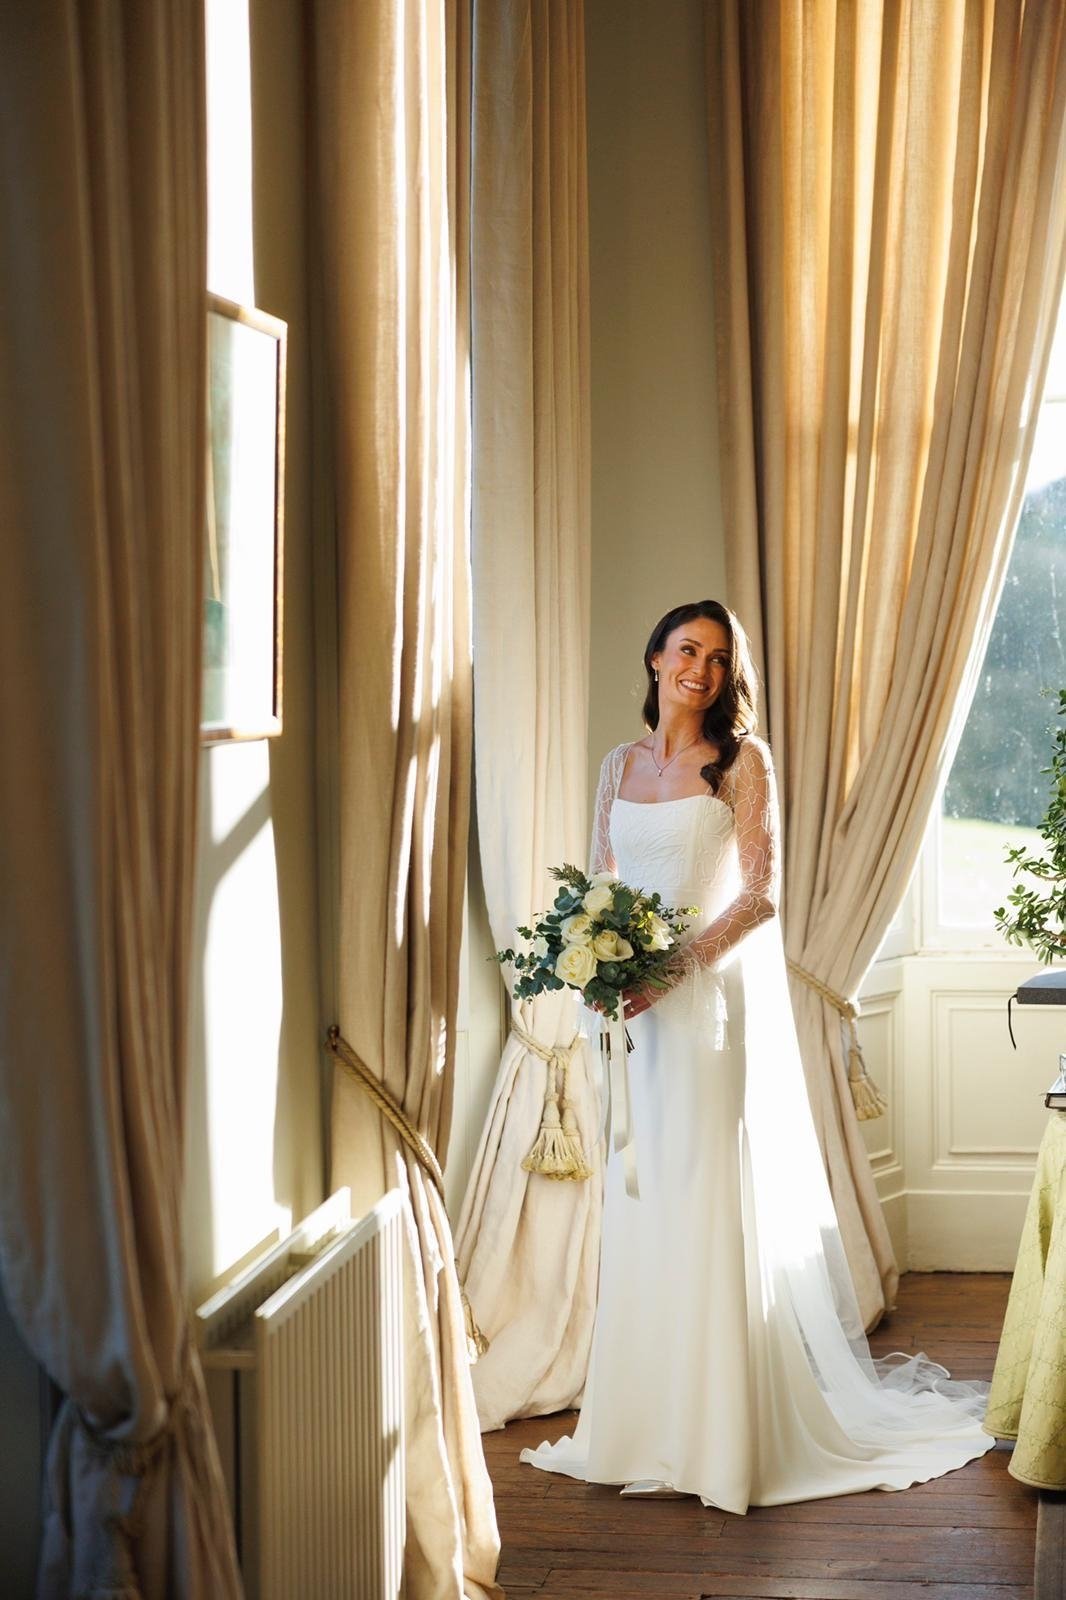 Beautiful real bride Shauna wore @alexandragrecco for her gorgeous Winter wedding day 🤍

We love seeing our real brides looking full of joy on their wedding day!

#TheSuite #TheSuiteRealBride #2024Bride